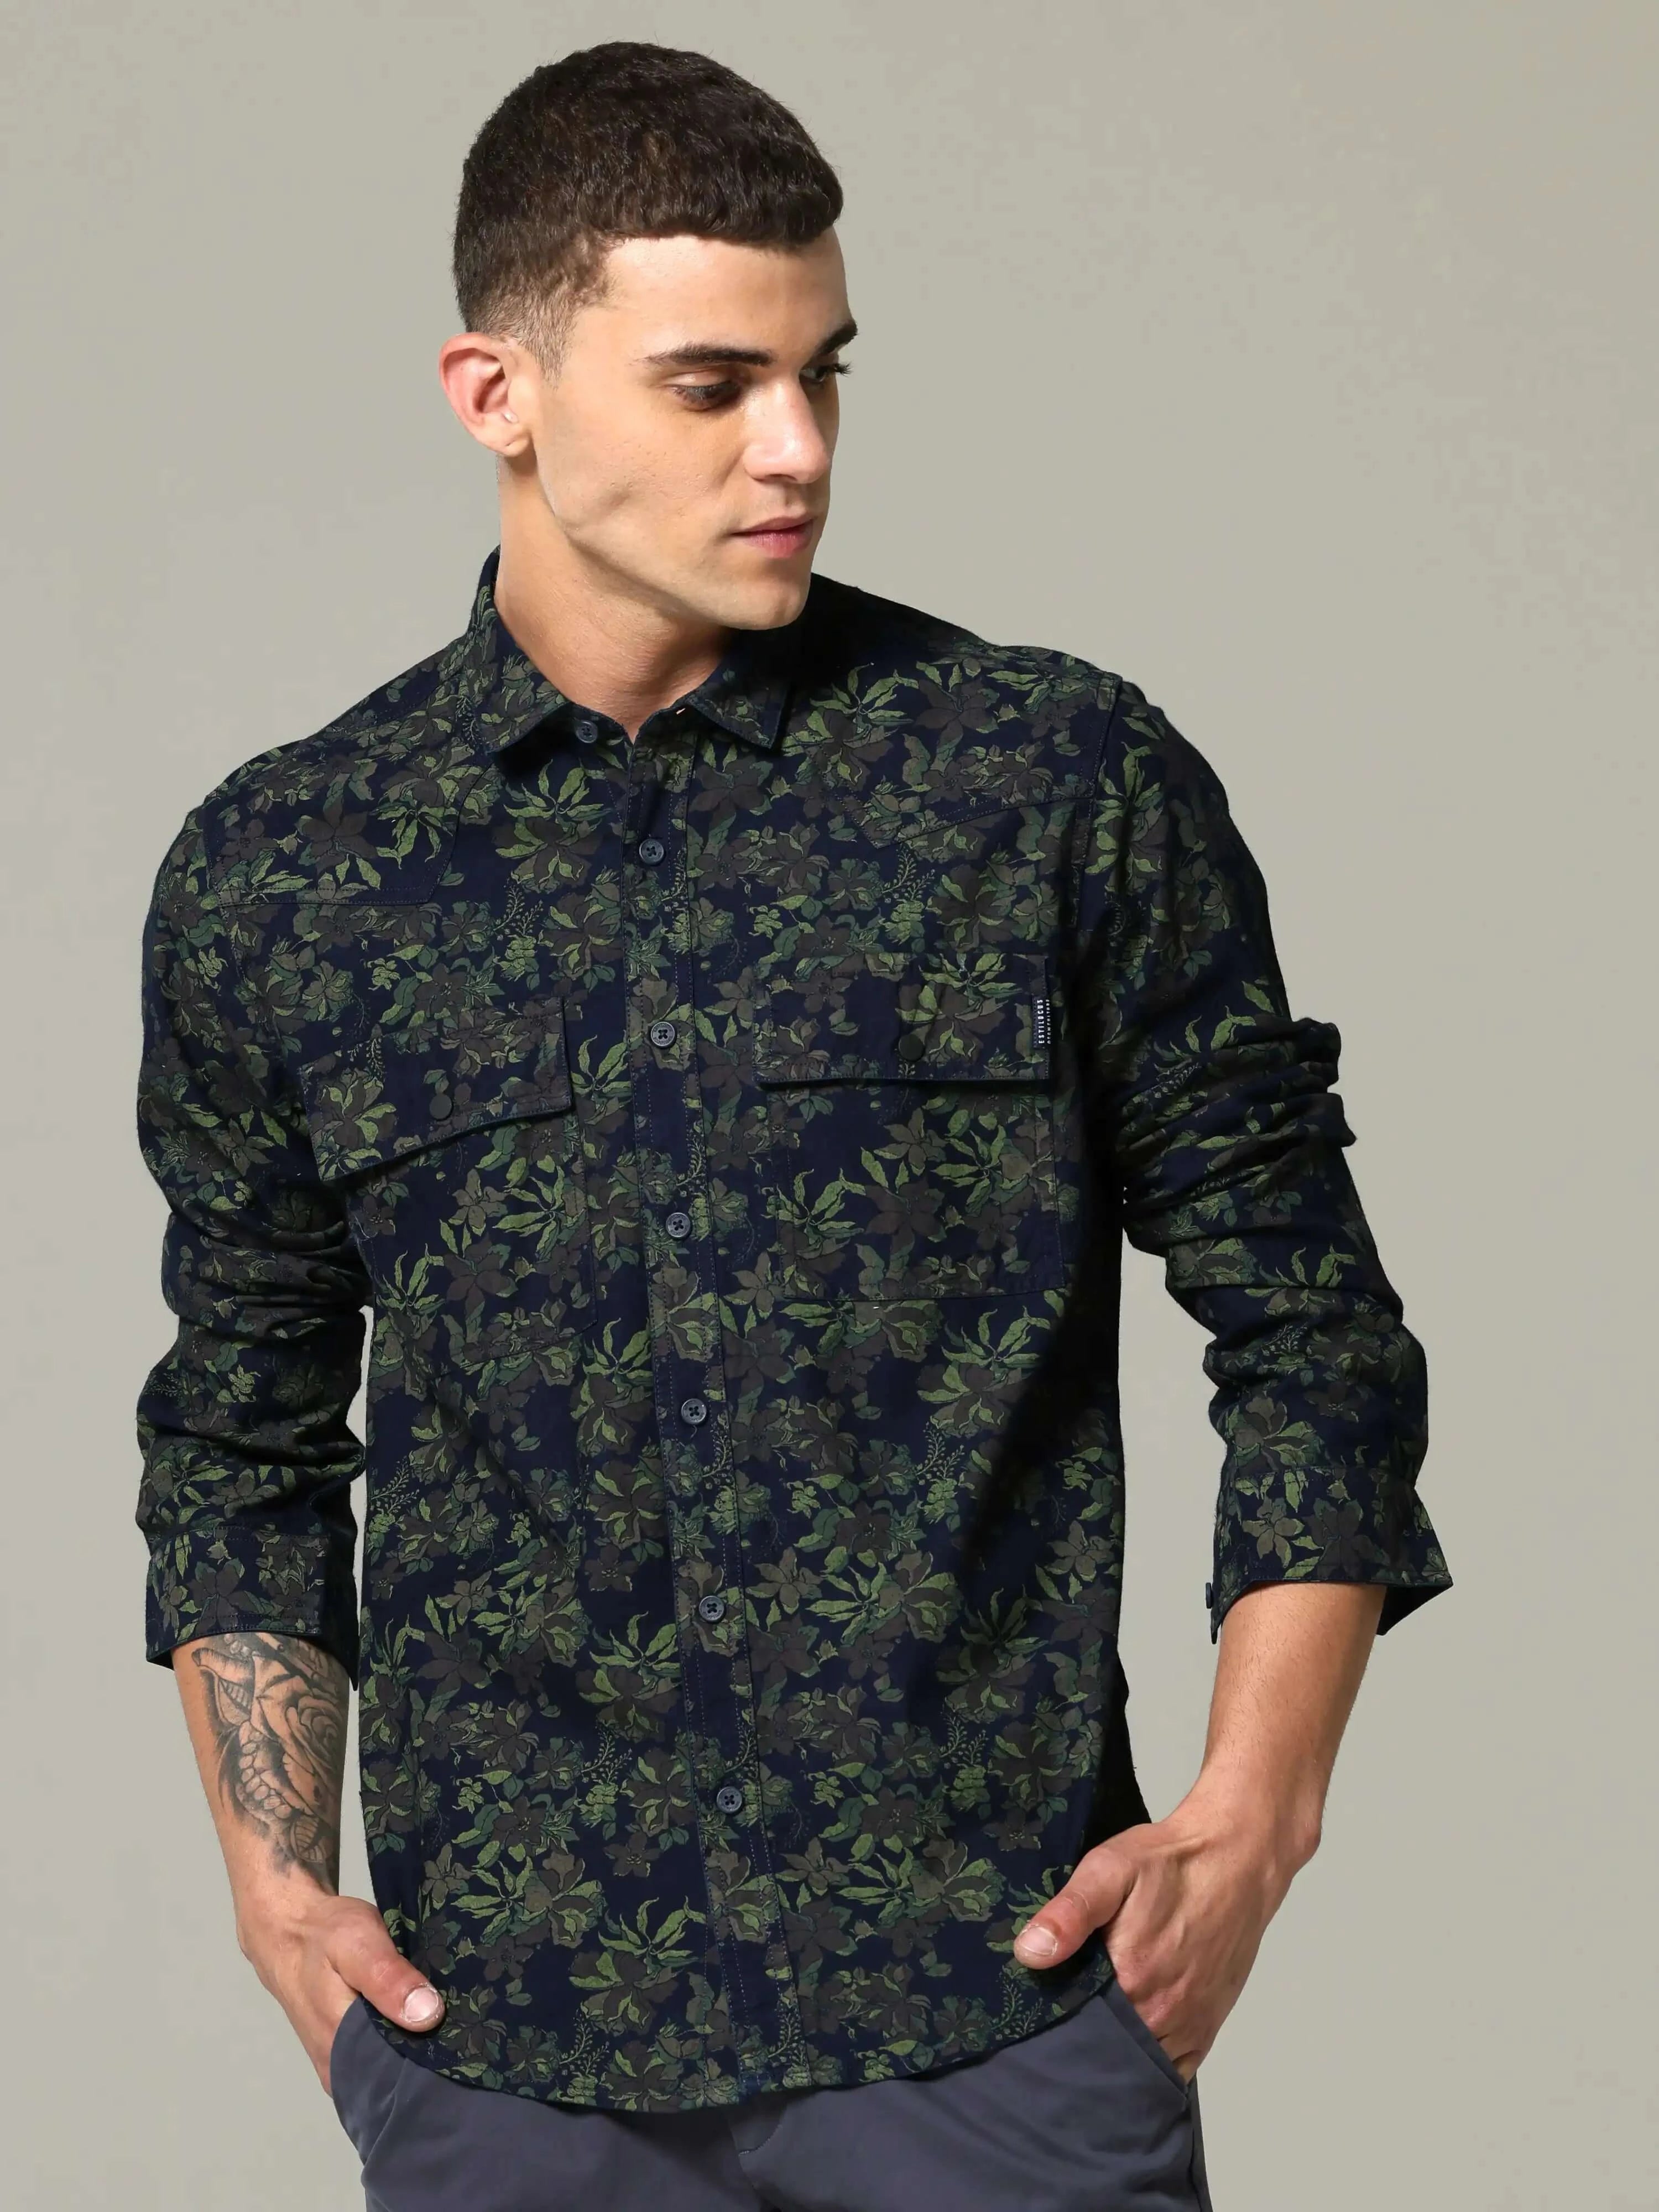 Indigo navy floral printed full sleeve casual shirt shop online at Estilocus. • 100% PREMIUM INDIGO COTTON • Full-sleeve solid shirt• Cut and sew placket• Regular collar• Double button square cuff.• Single pocket with logo embroidery• Curved hemline• Fine